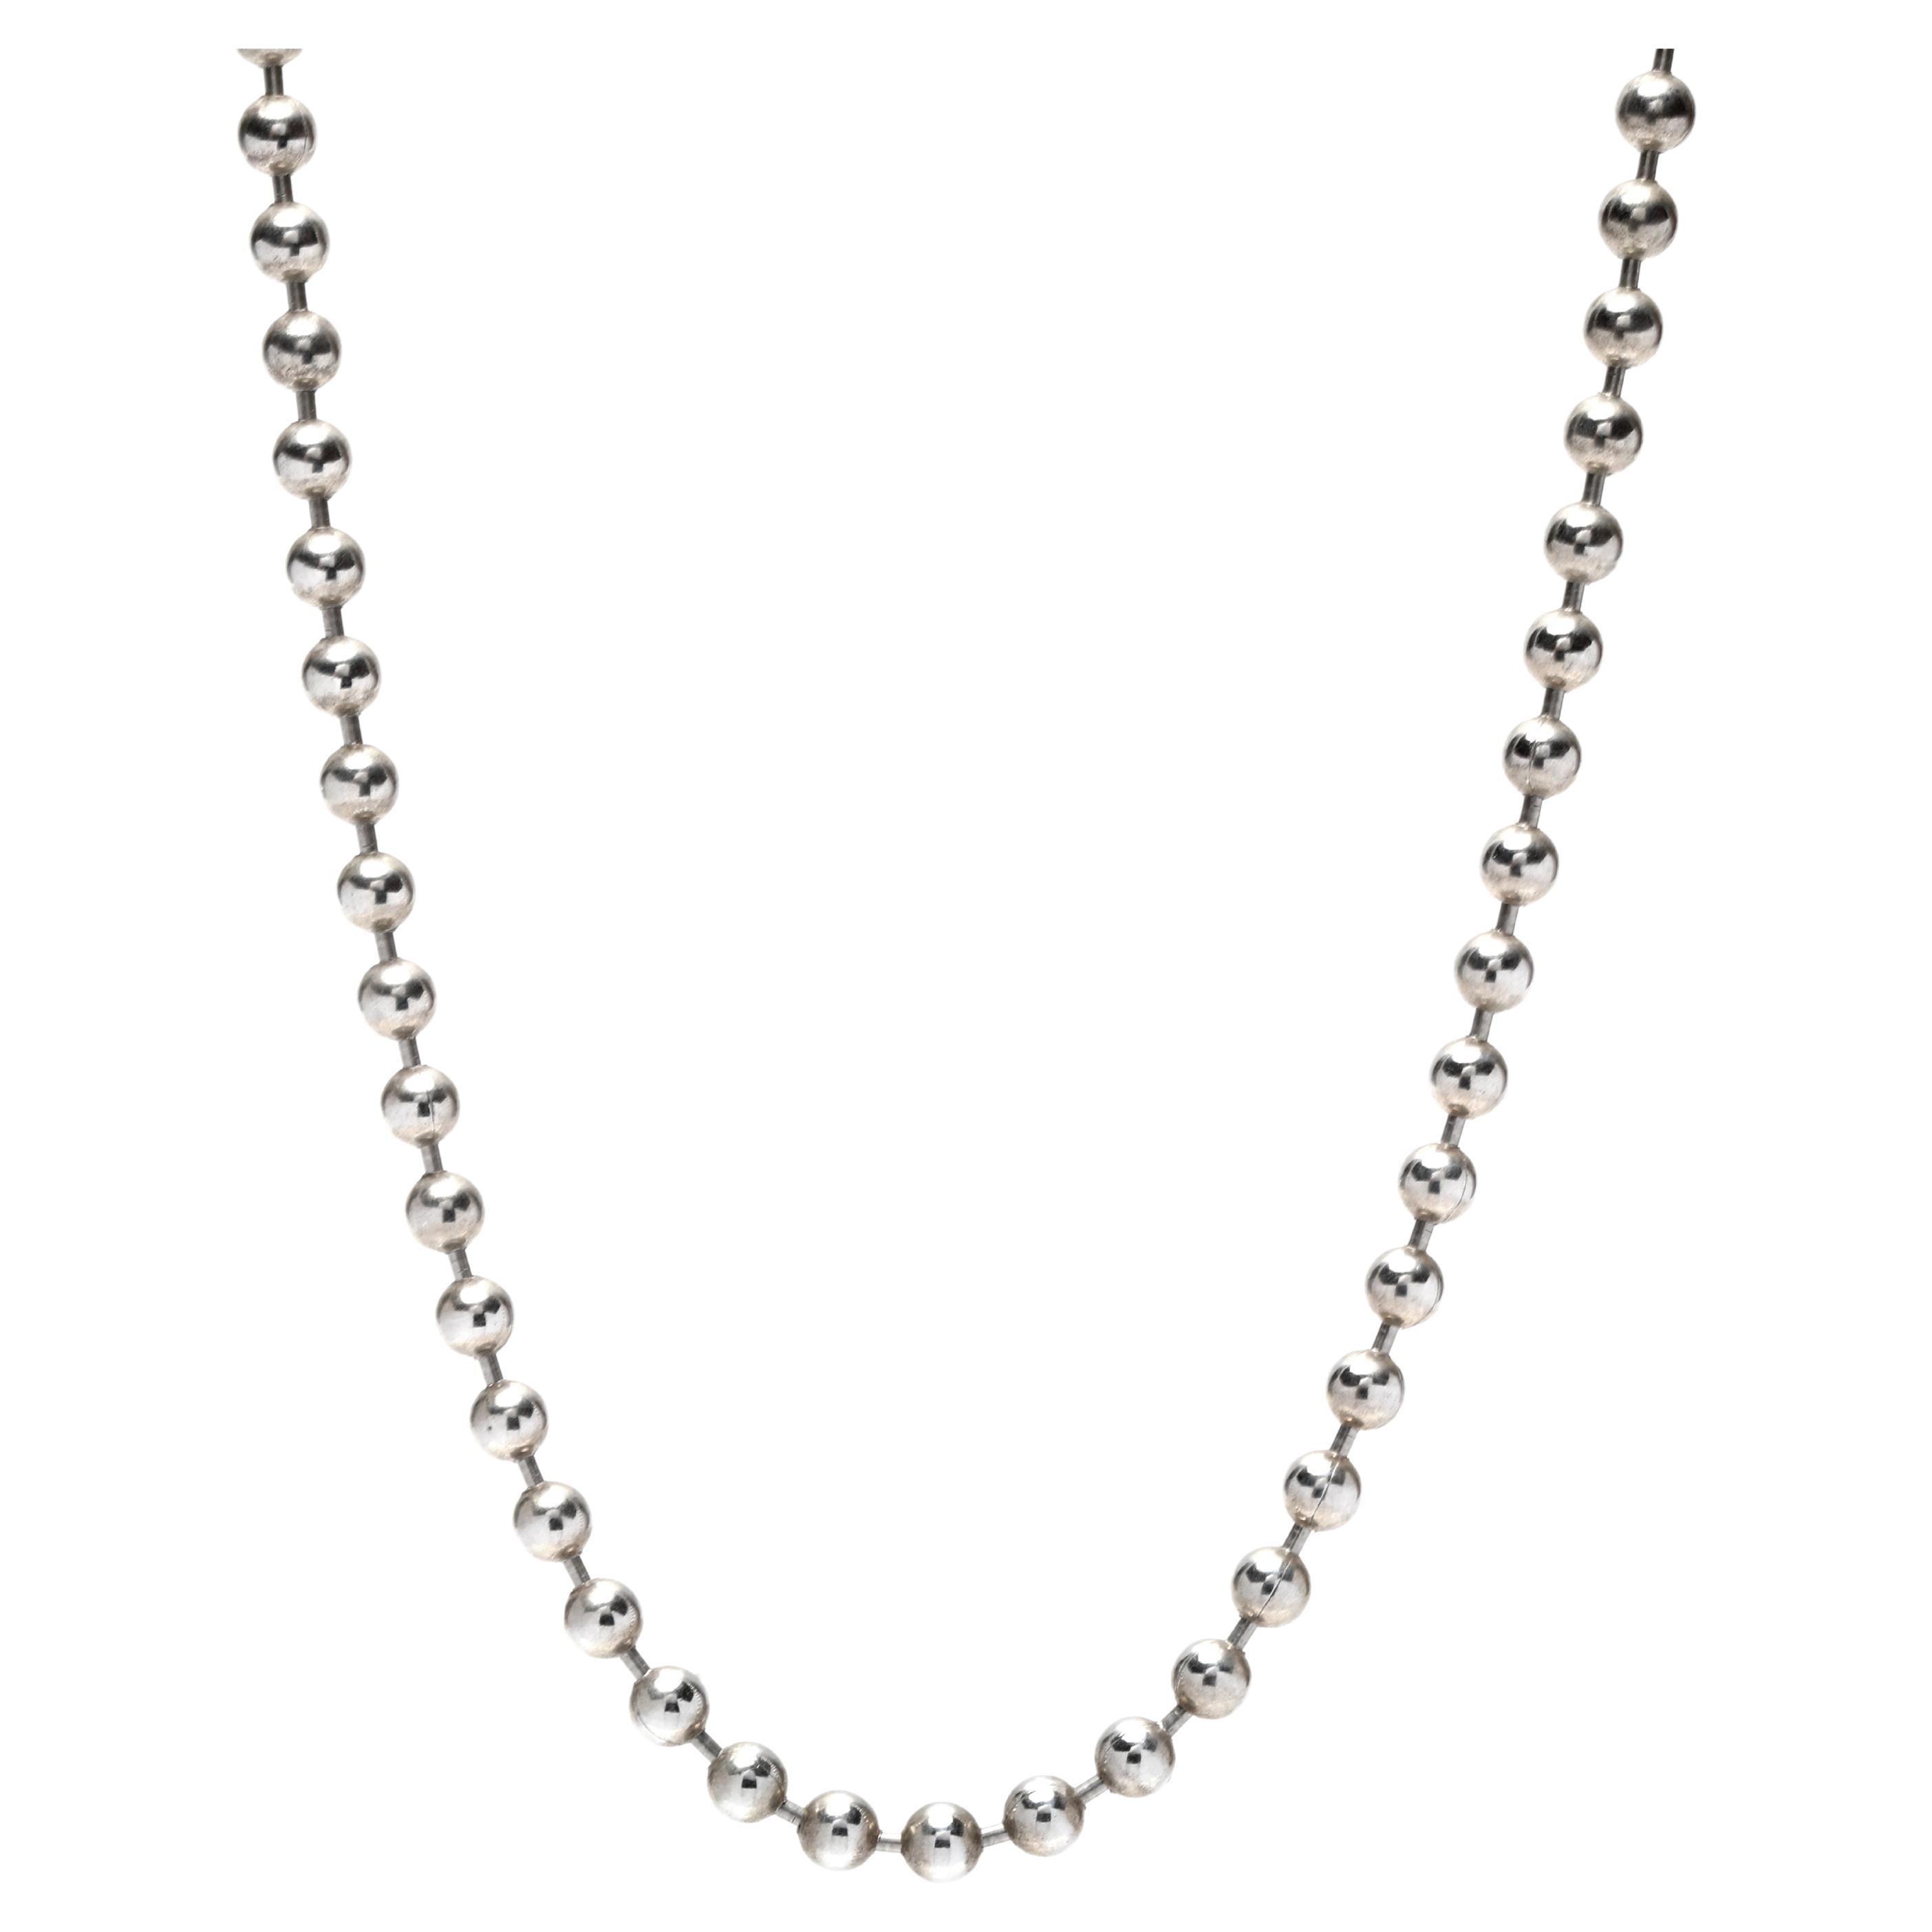 Large Bead Chain Necklace, Sterling Silver, Silver Bead For Sale